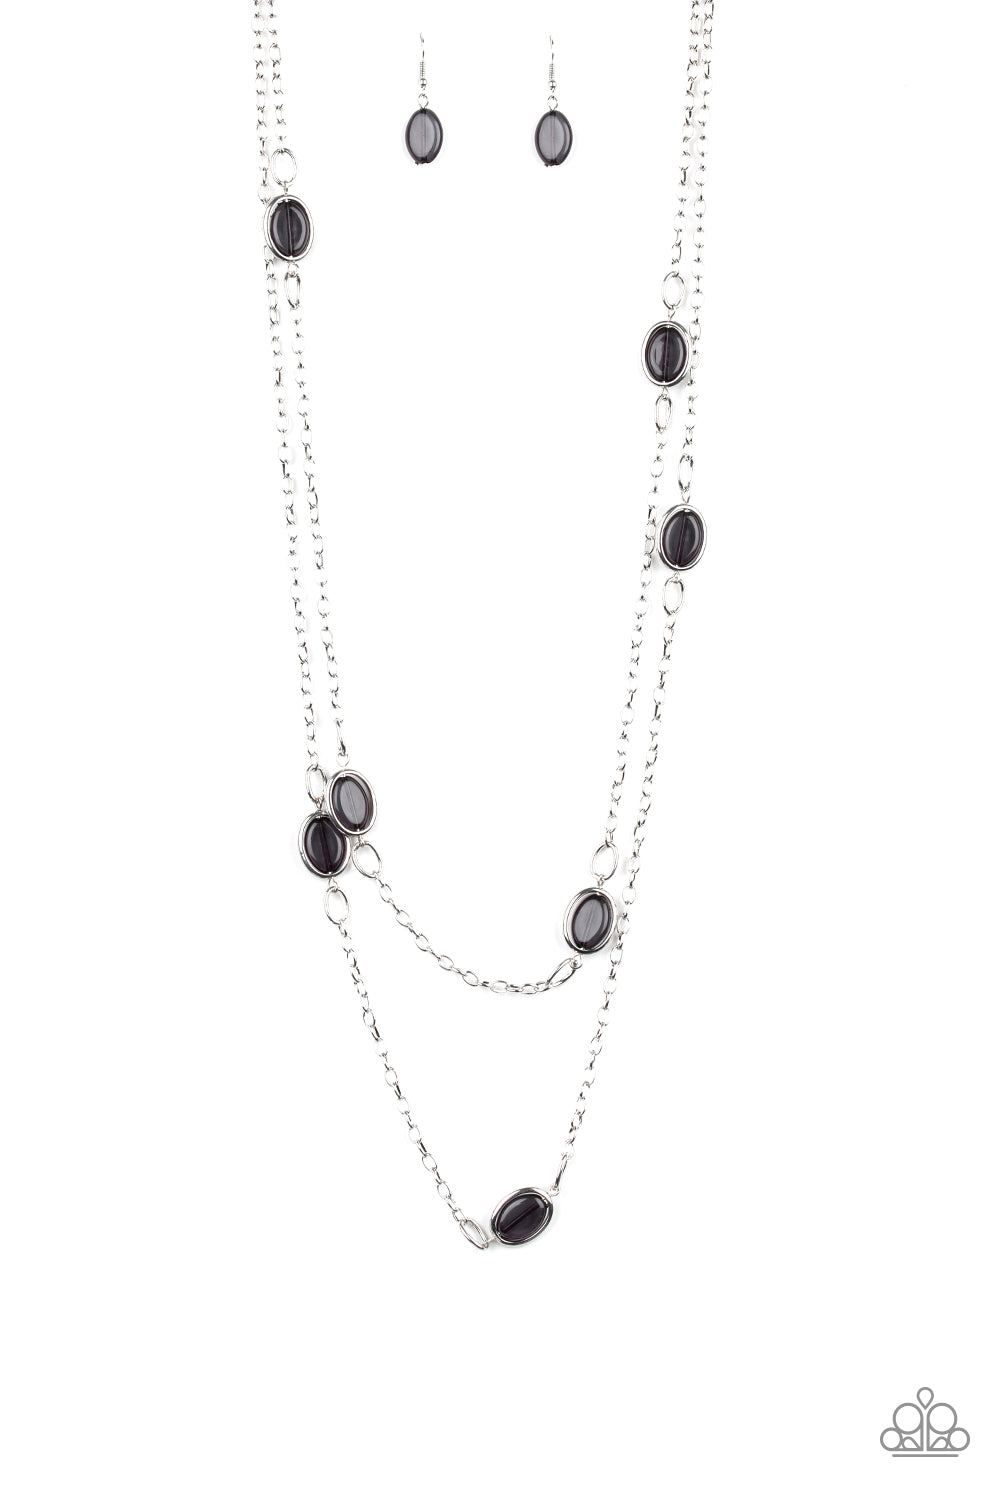 Paparazzi Long Layered Necklace - Back For More - Black (#166)